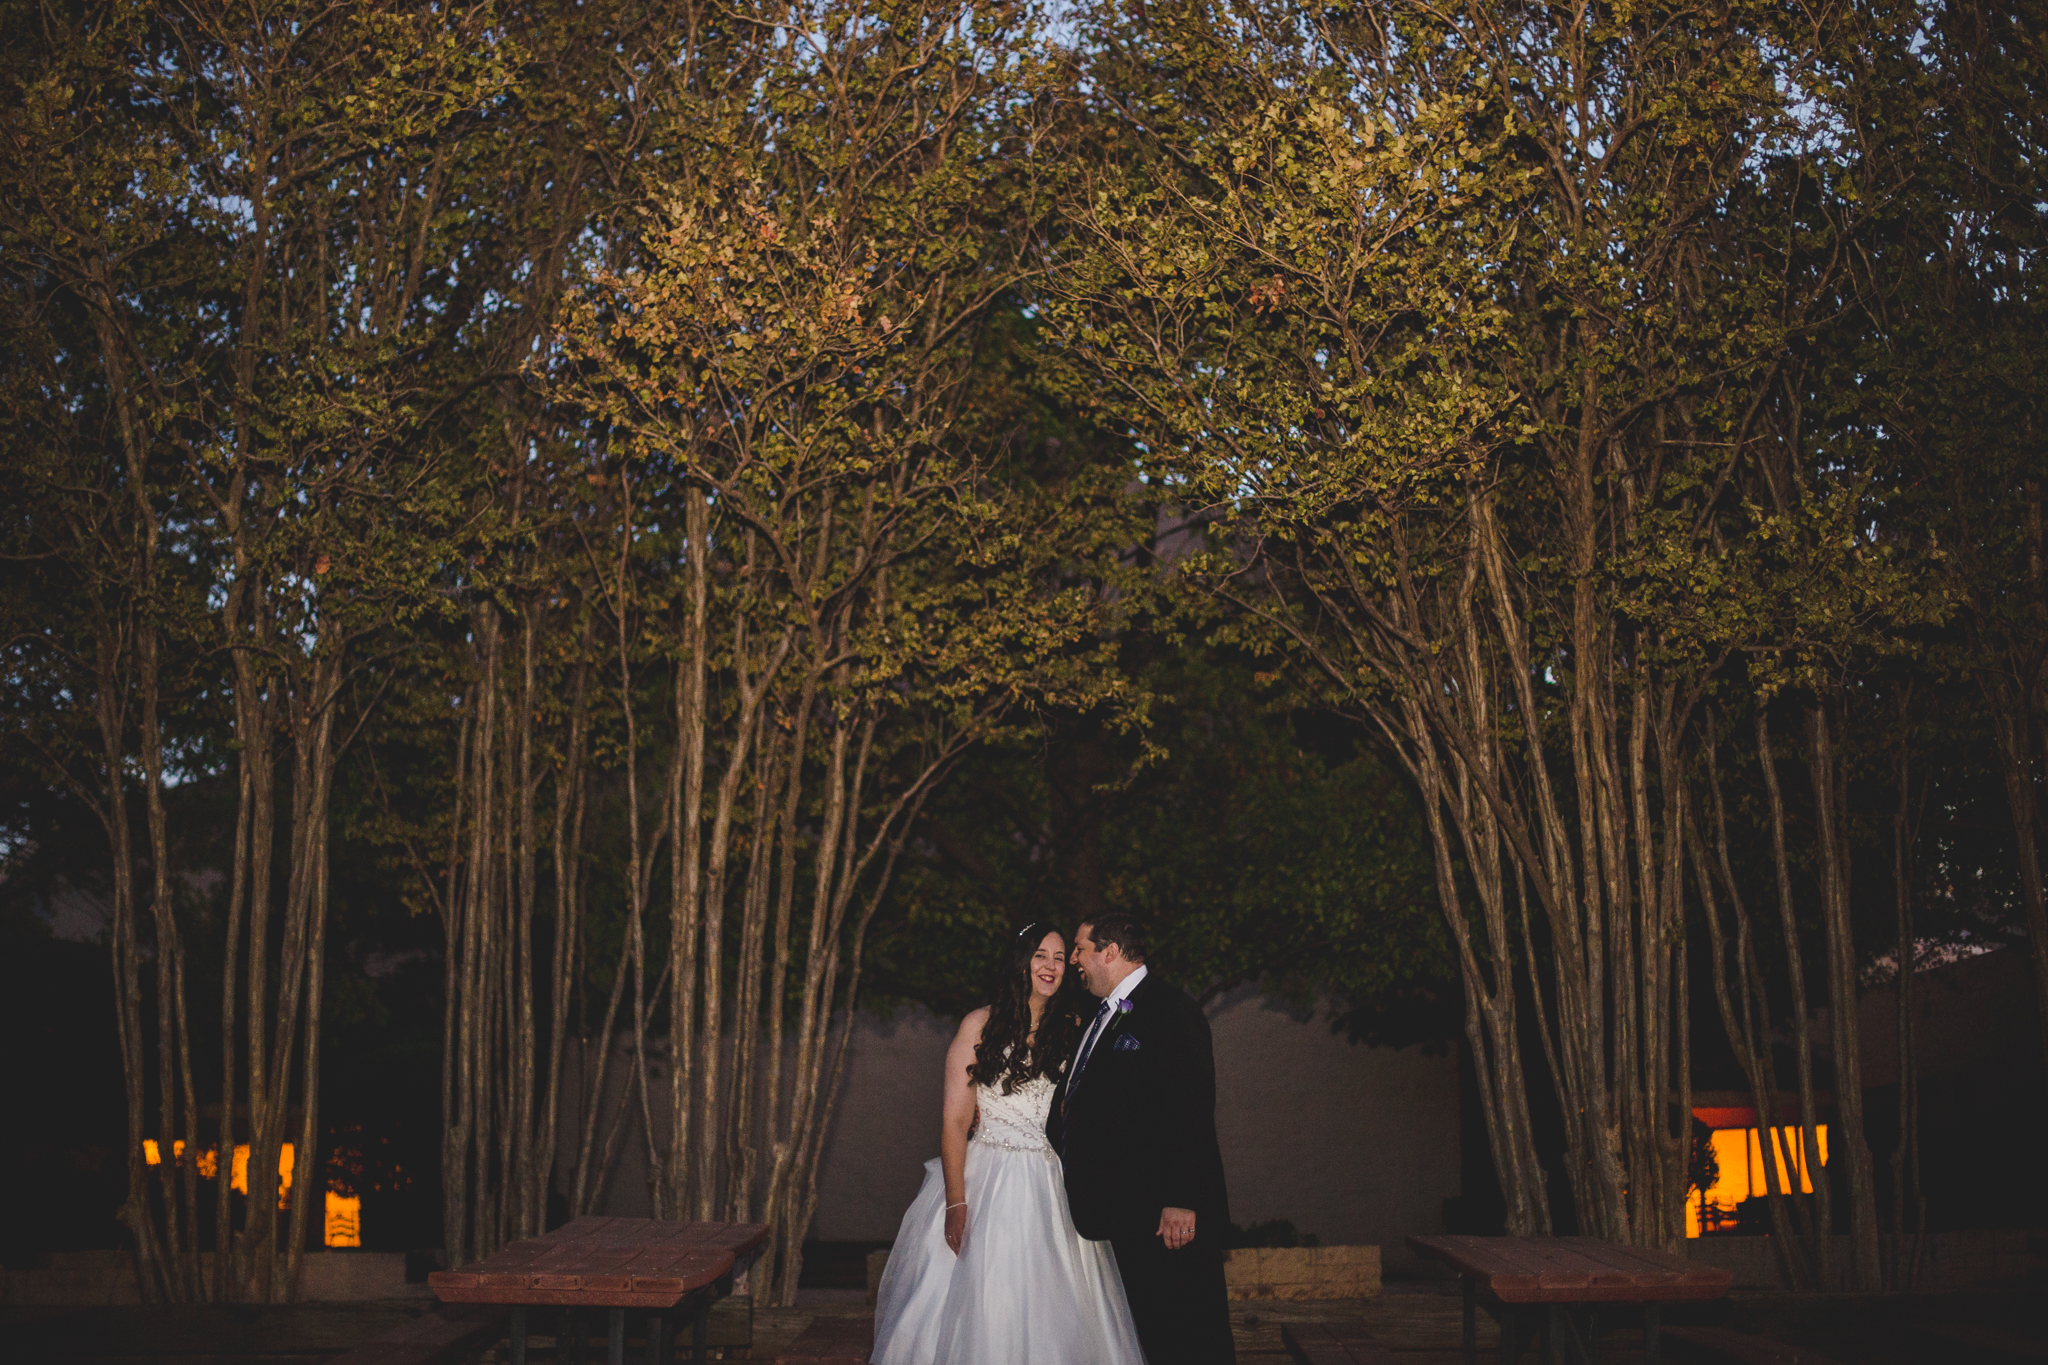 rs creative bride and groom laugh among trees at night cool